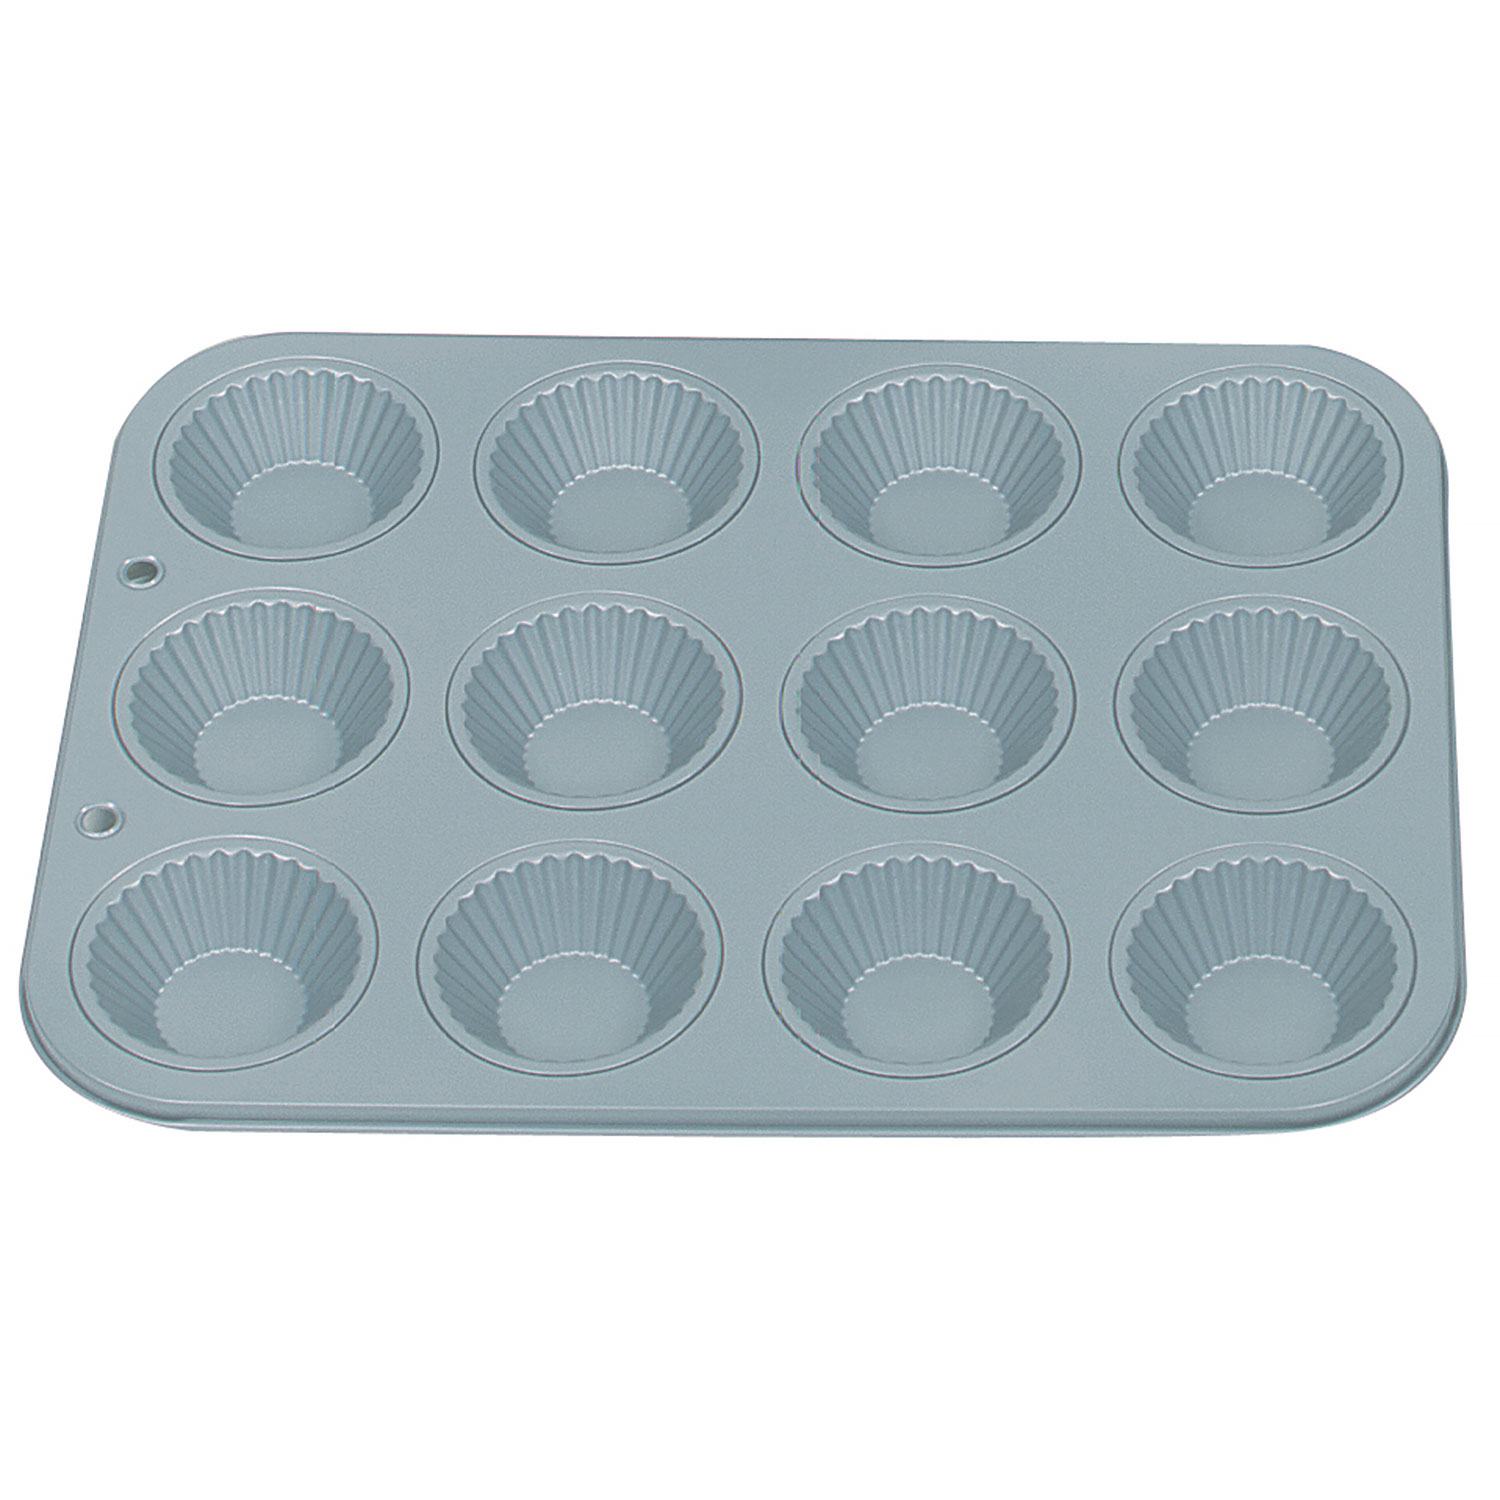 Taste of Home Non-Stick Muffin Pan at Tractor Supply Co.